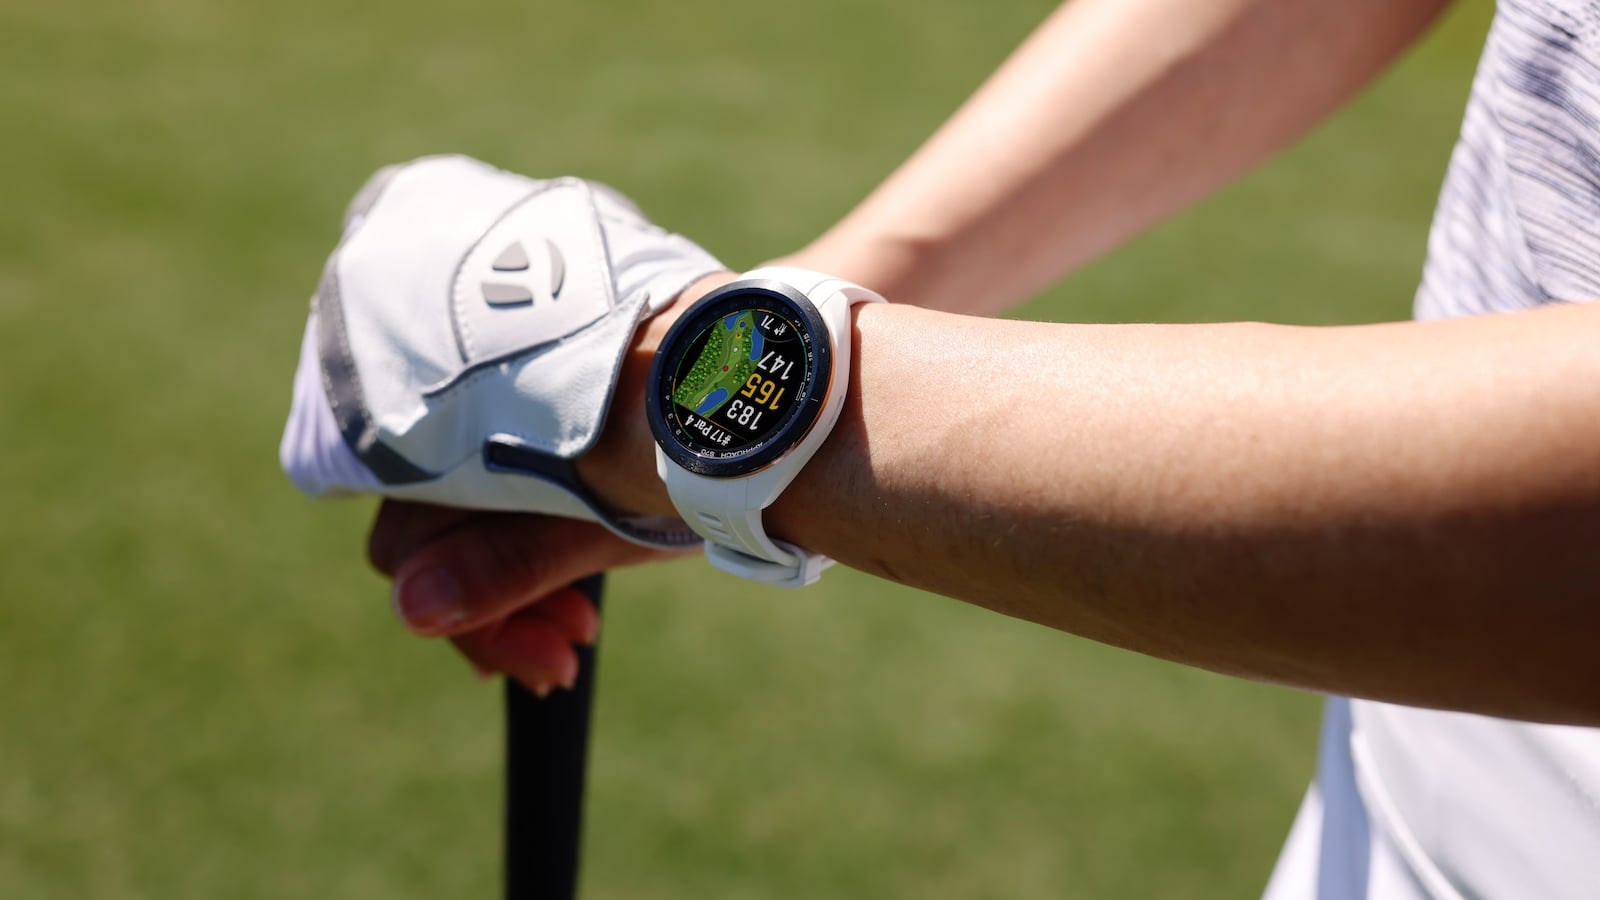 Garmin Approach S70 golf smartwatch has game-changing tools